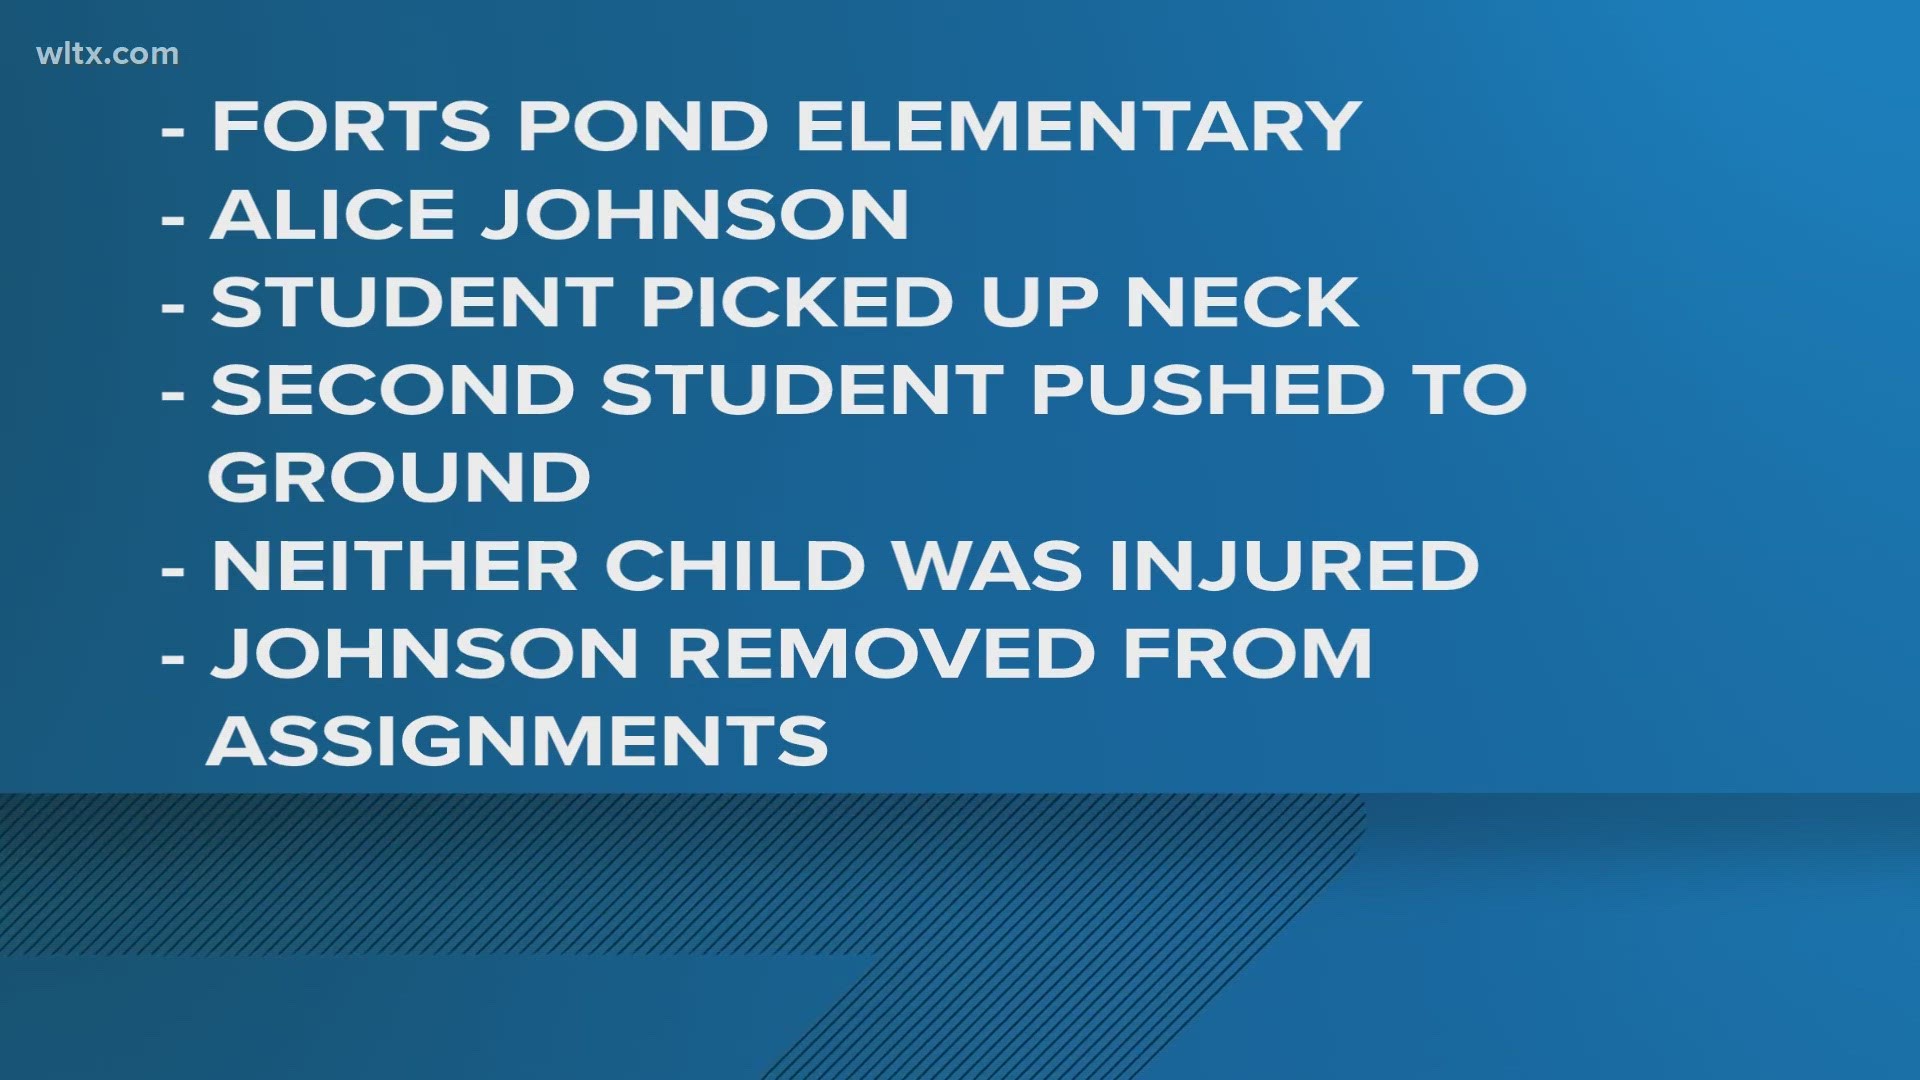 It happened at Forts Pond road elementary school.  Alice Johnson is accused of picking a student up by his neck and a second was pushed.